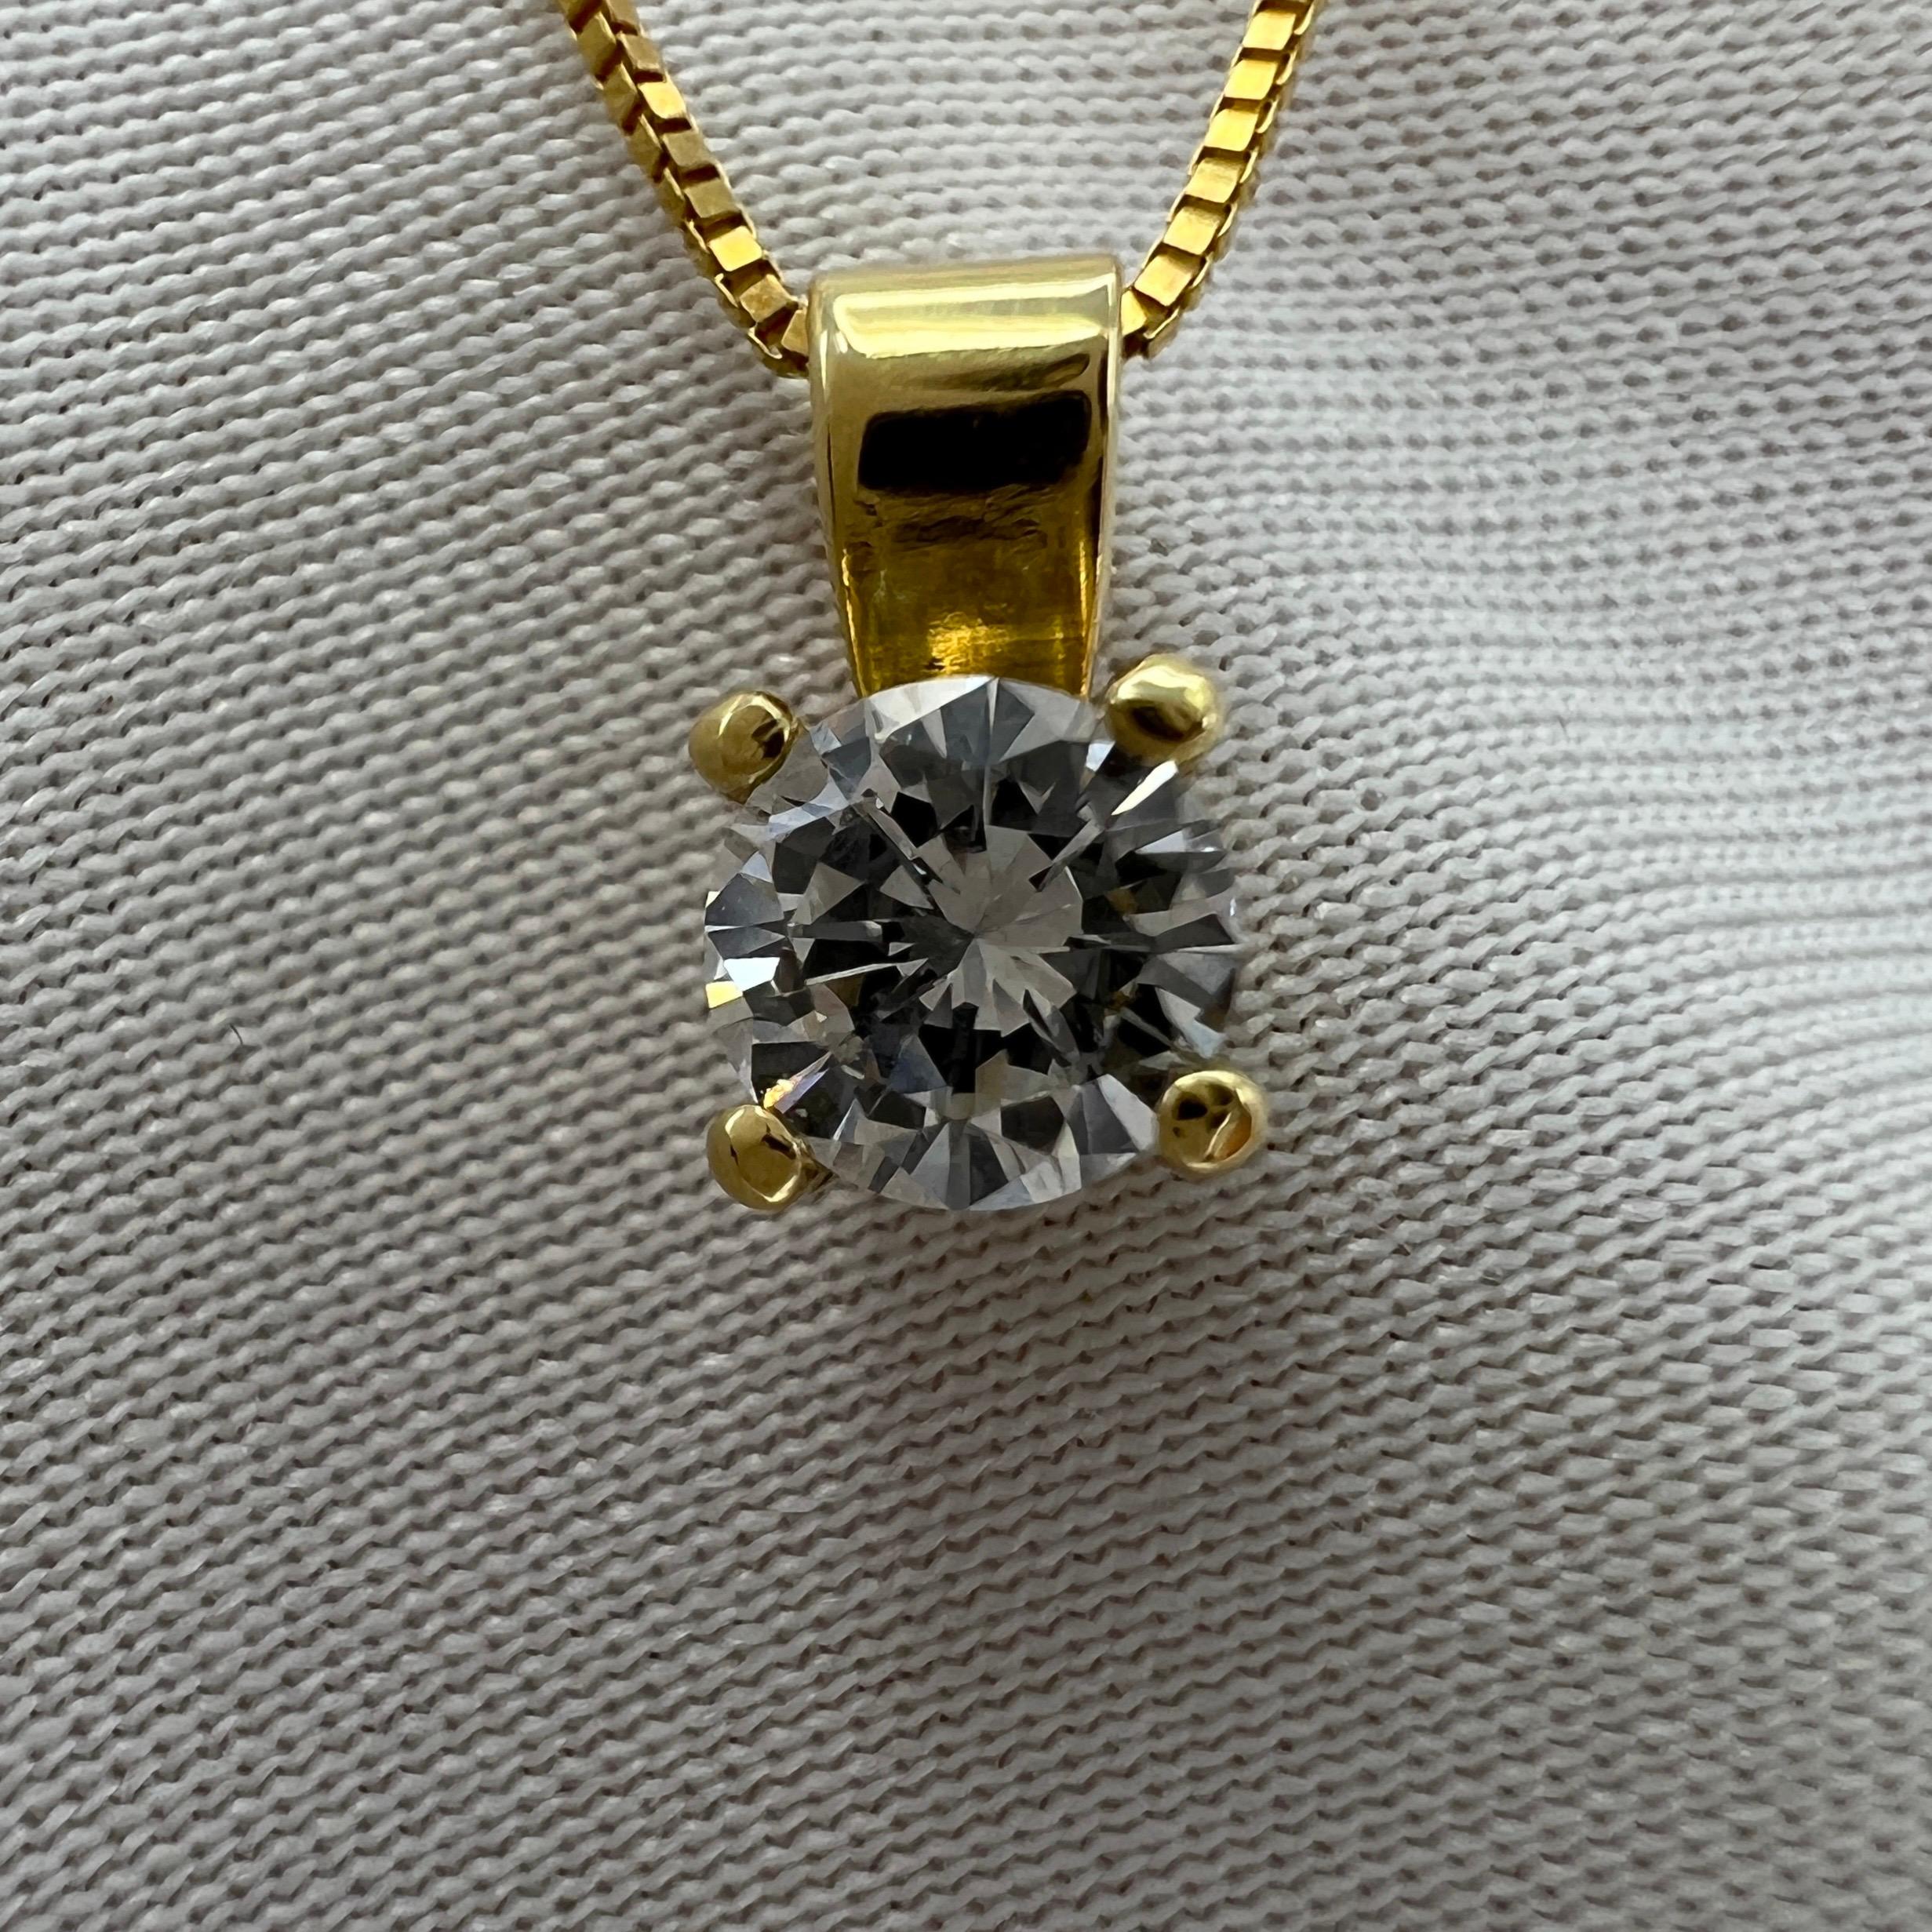 Fine Natural White Diamond Round Cut 18k Yellow Gold Solitaire Pendant Necklace.

0.27 Carat diamond with excellent colour and clarity. 
E/F colour and VS2 clarity. Very clean and very white. Also has an excellent round brilliant cut showing lots of